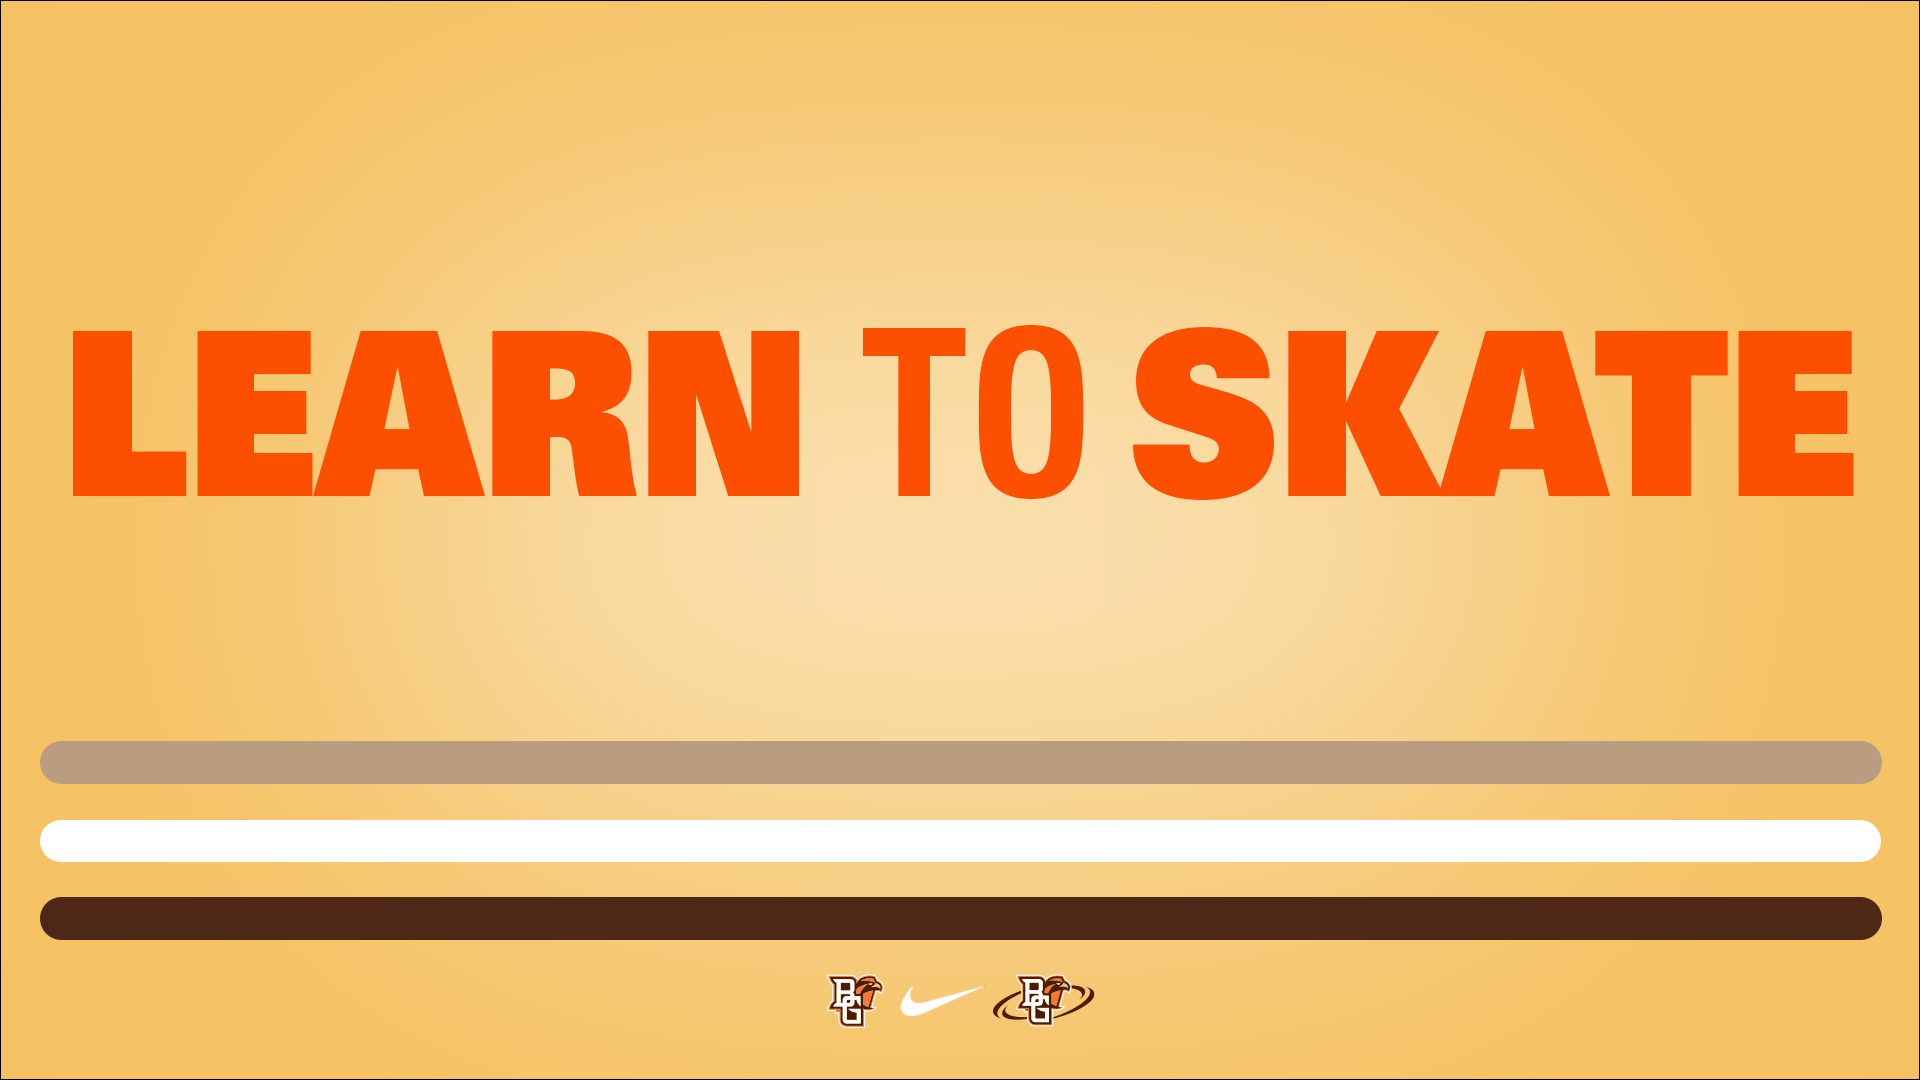 Learn to Skate